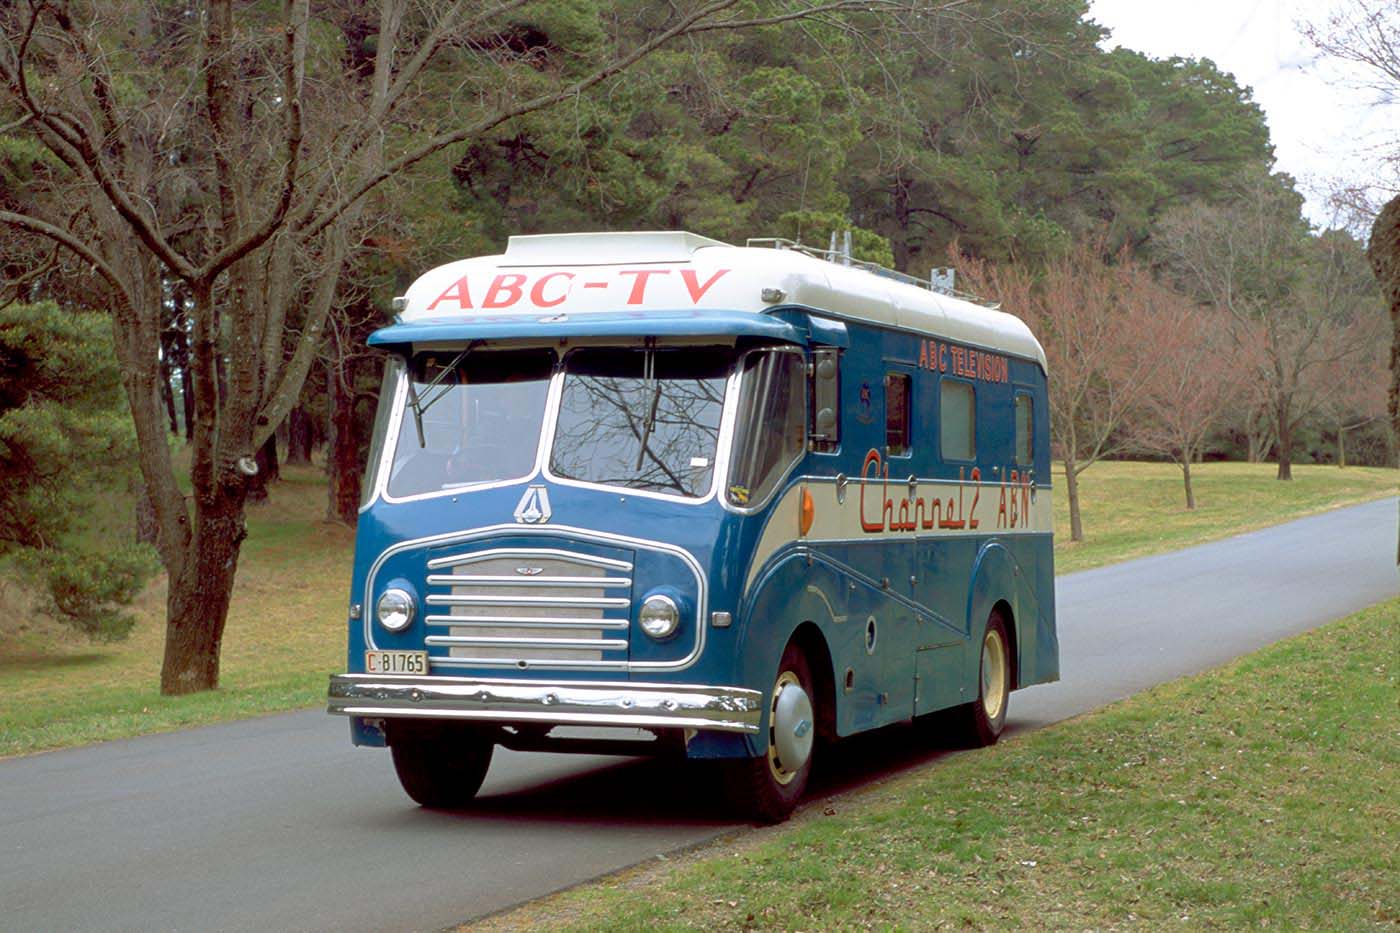 Blue van on a country road. ABC TV is painted on the front above the windscreen. - click to view larger image